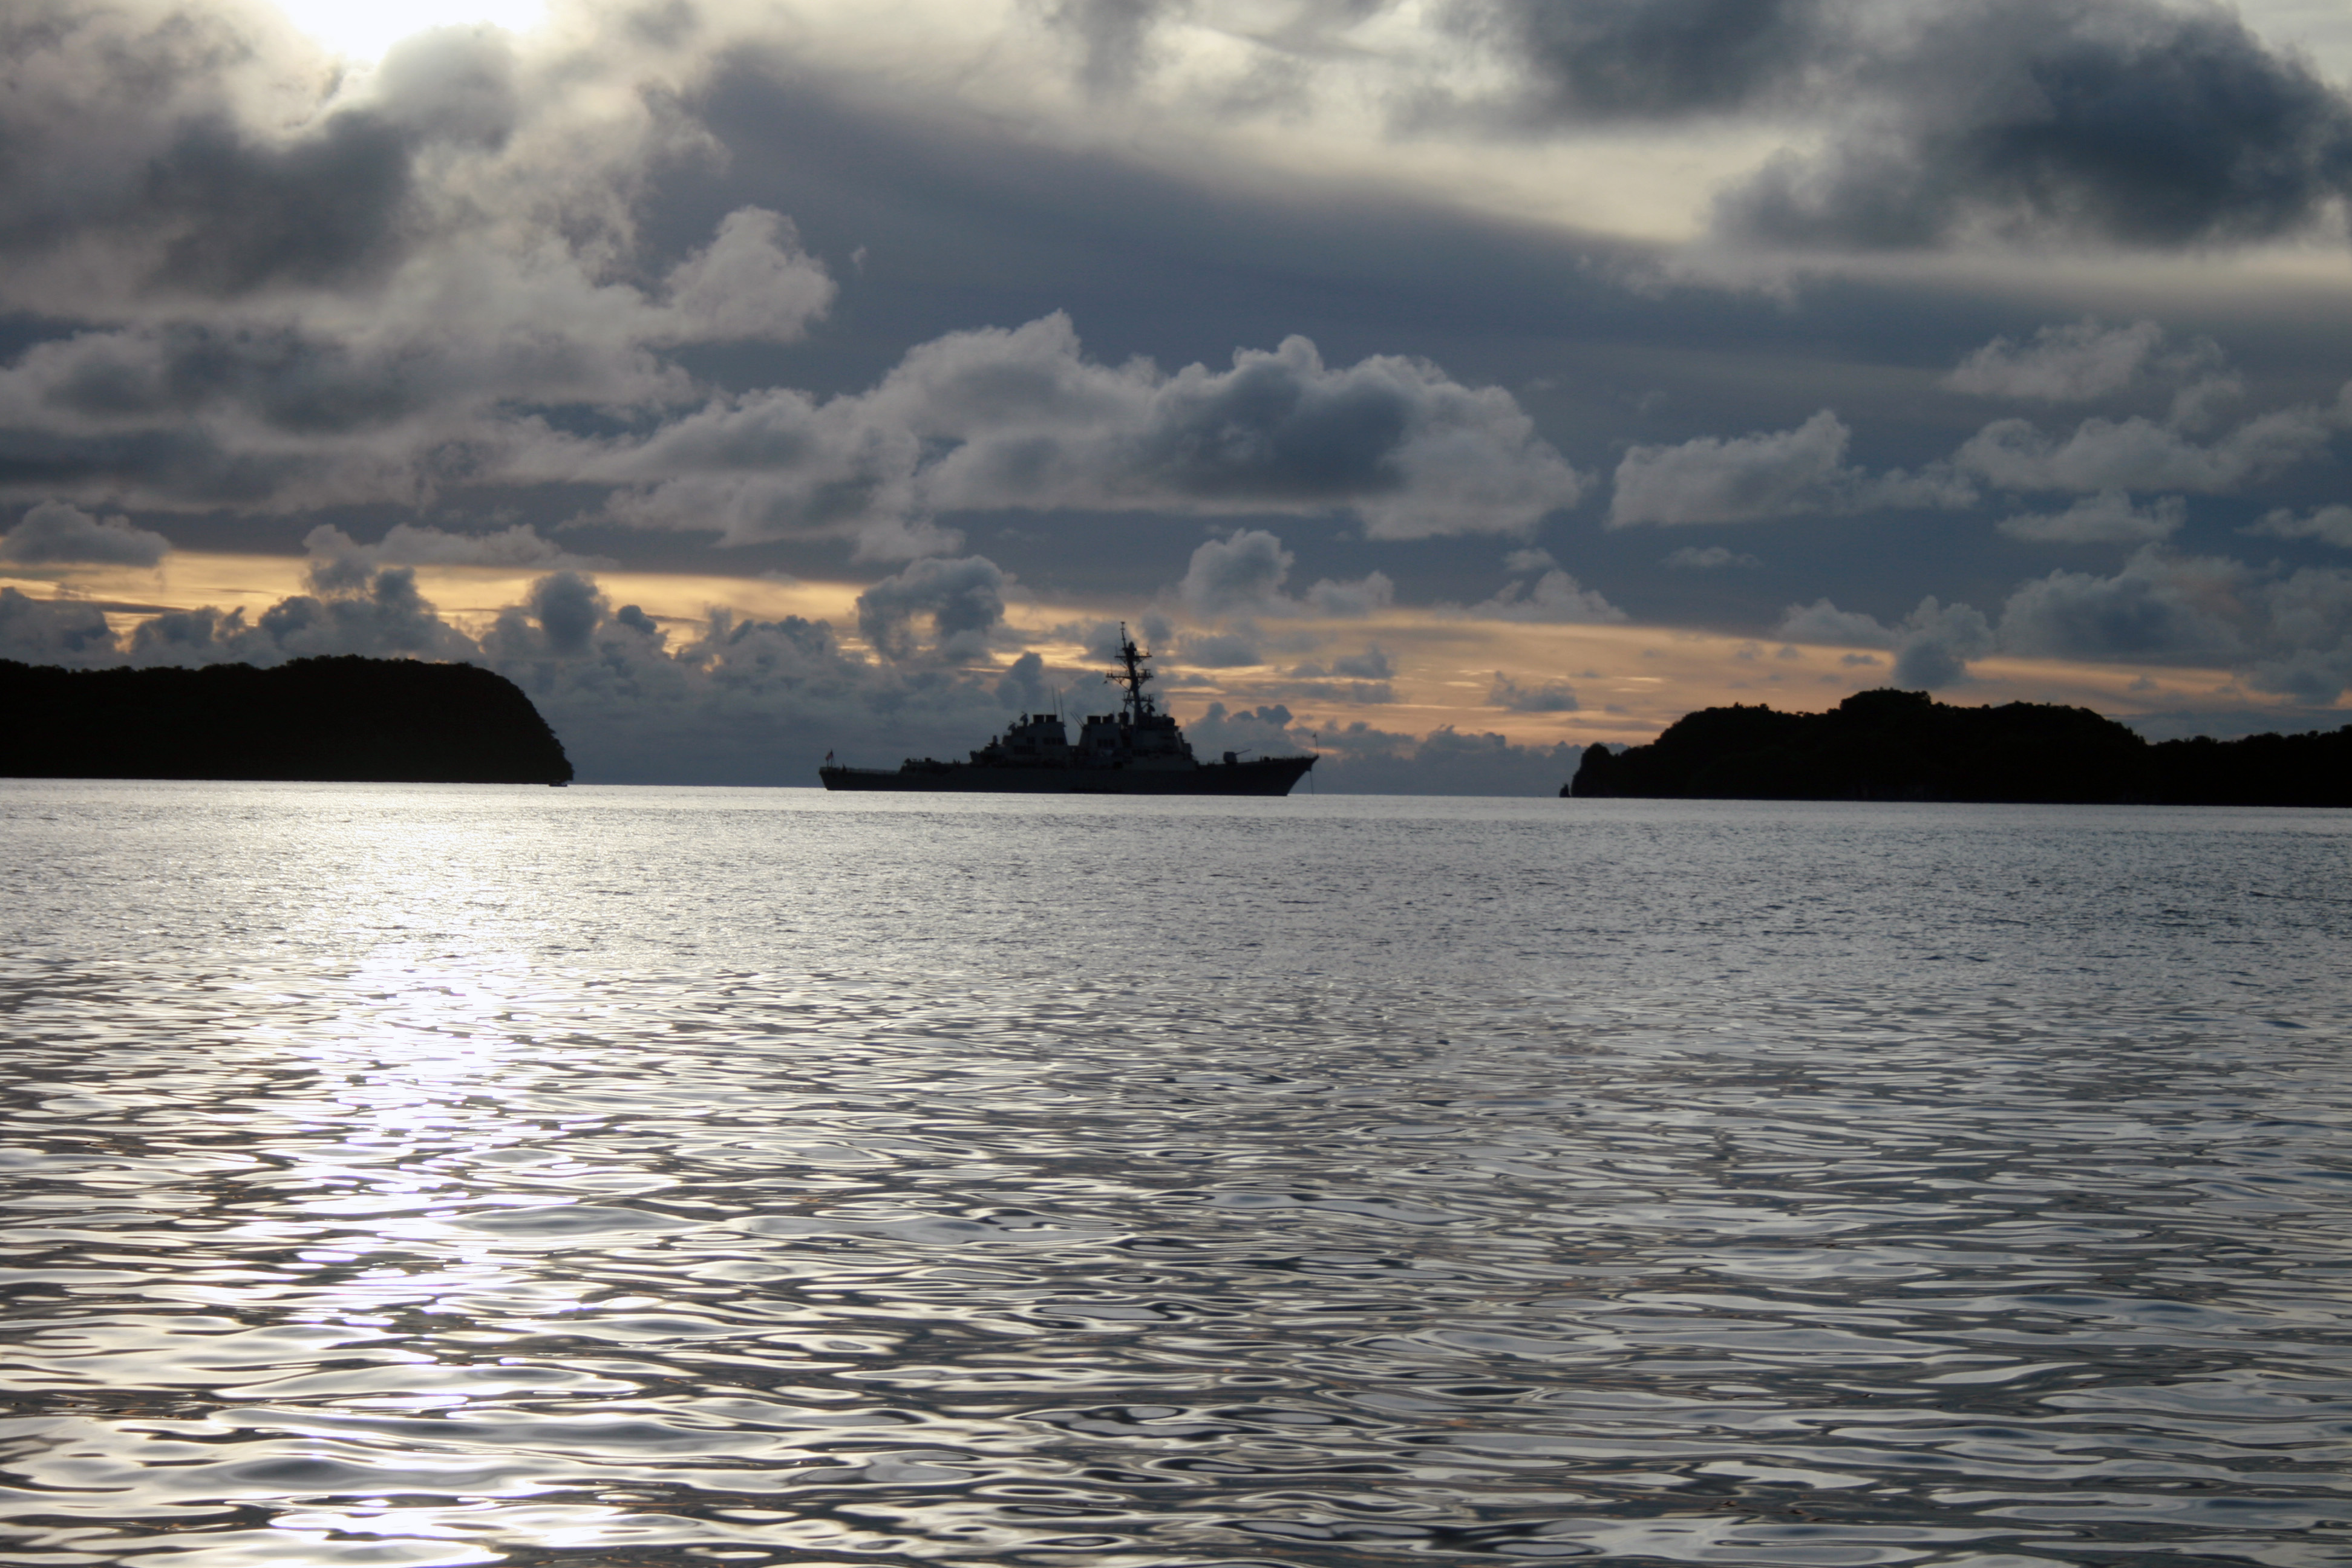 USS Benfold (DD 65) is at anchor off Koror, Republic of Palau in 2012. US Navy Photo